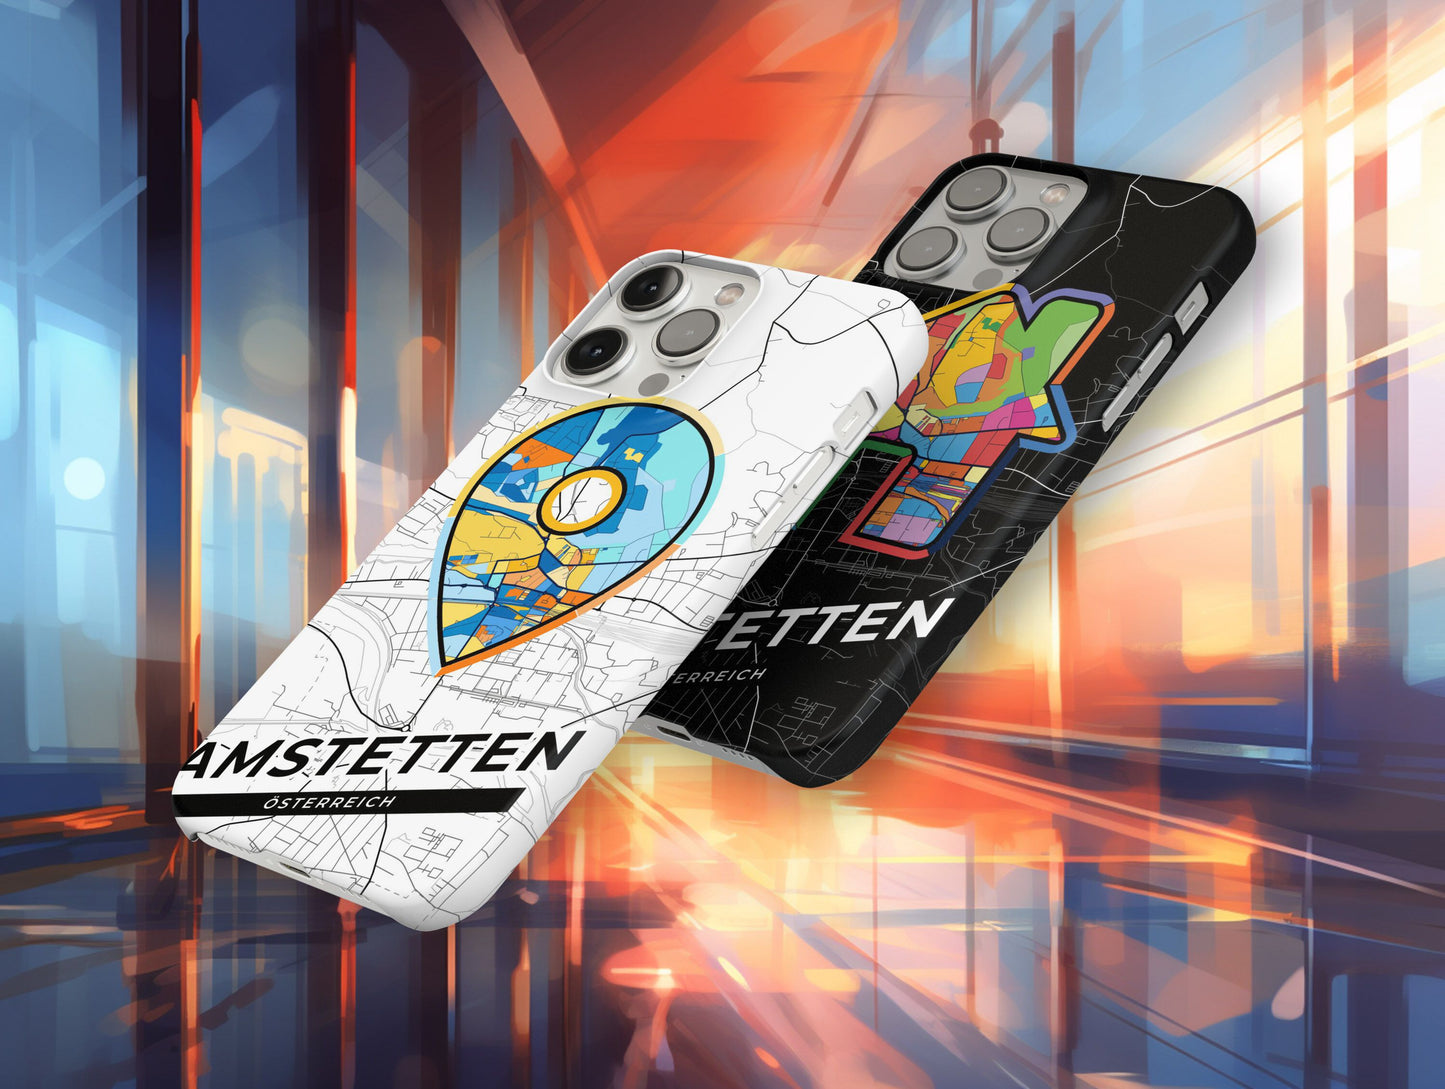 Amstetten Österreich slim phone case with colorful icon. Birthday, wedding or housewarming gift. Couple match cases.